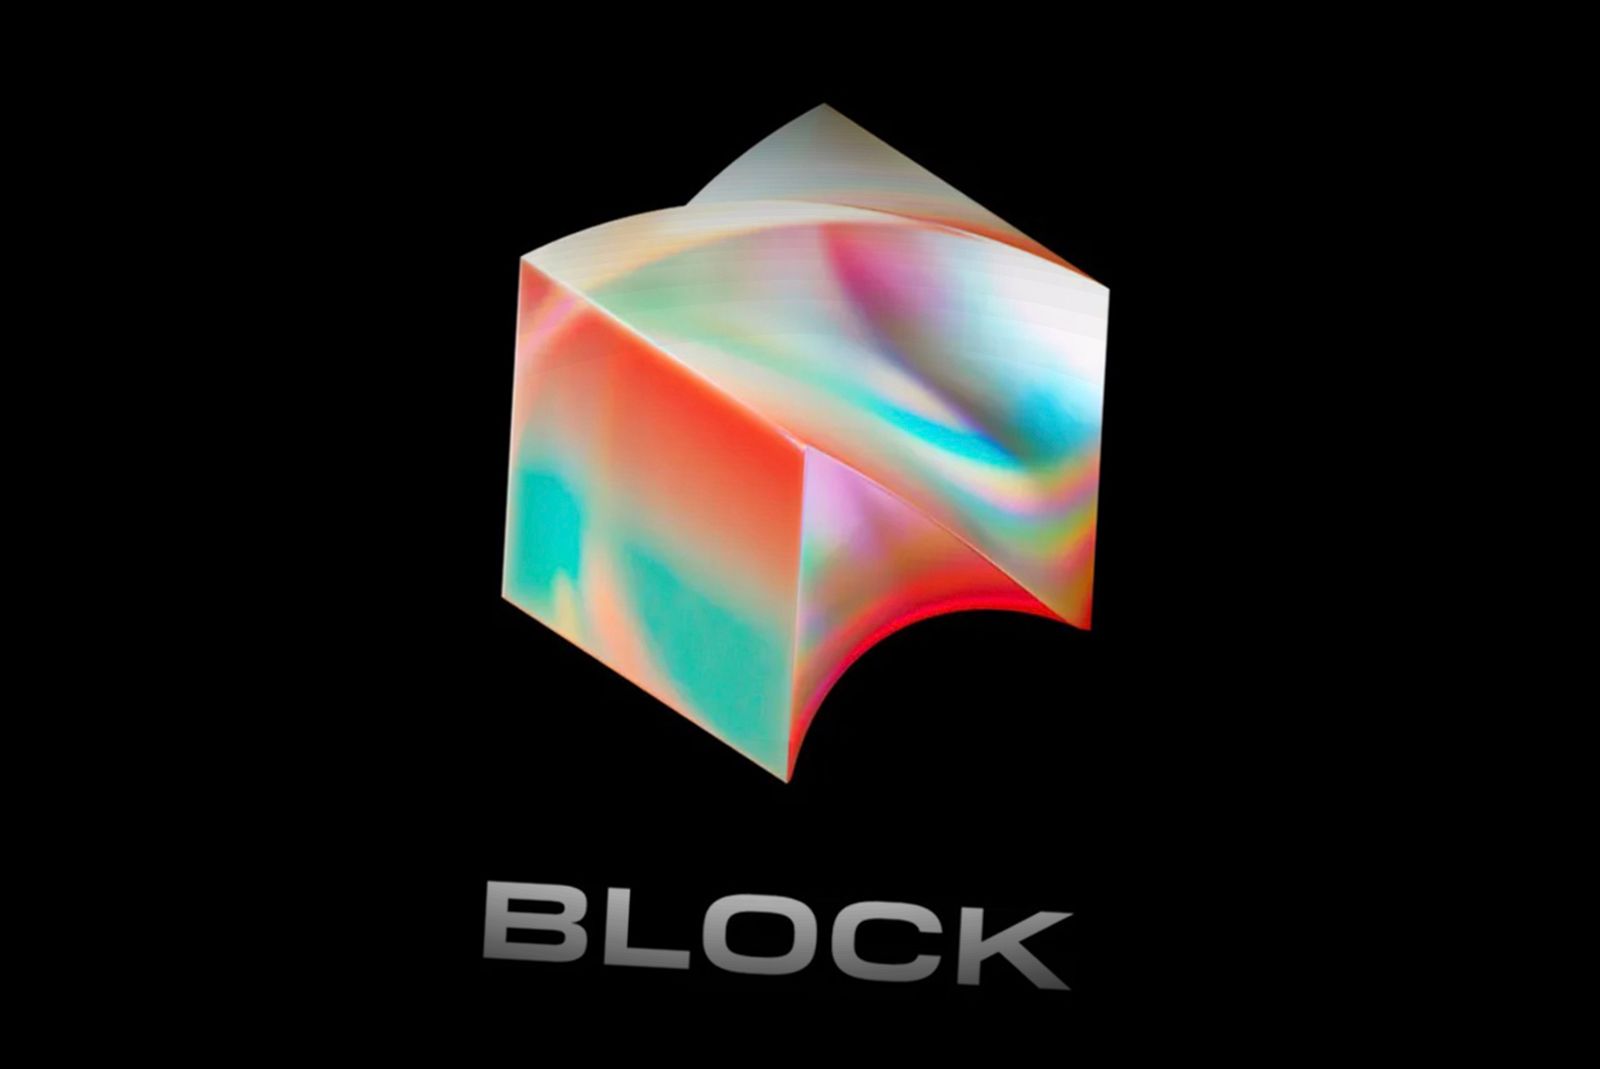 Jack Dorsey's Square gets a new name: Block photo 1